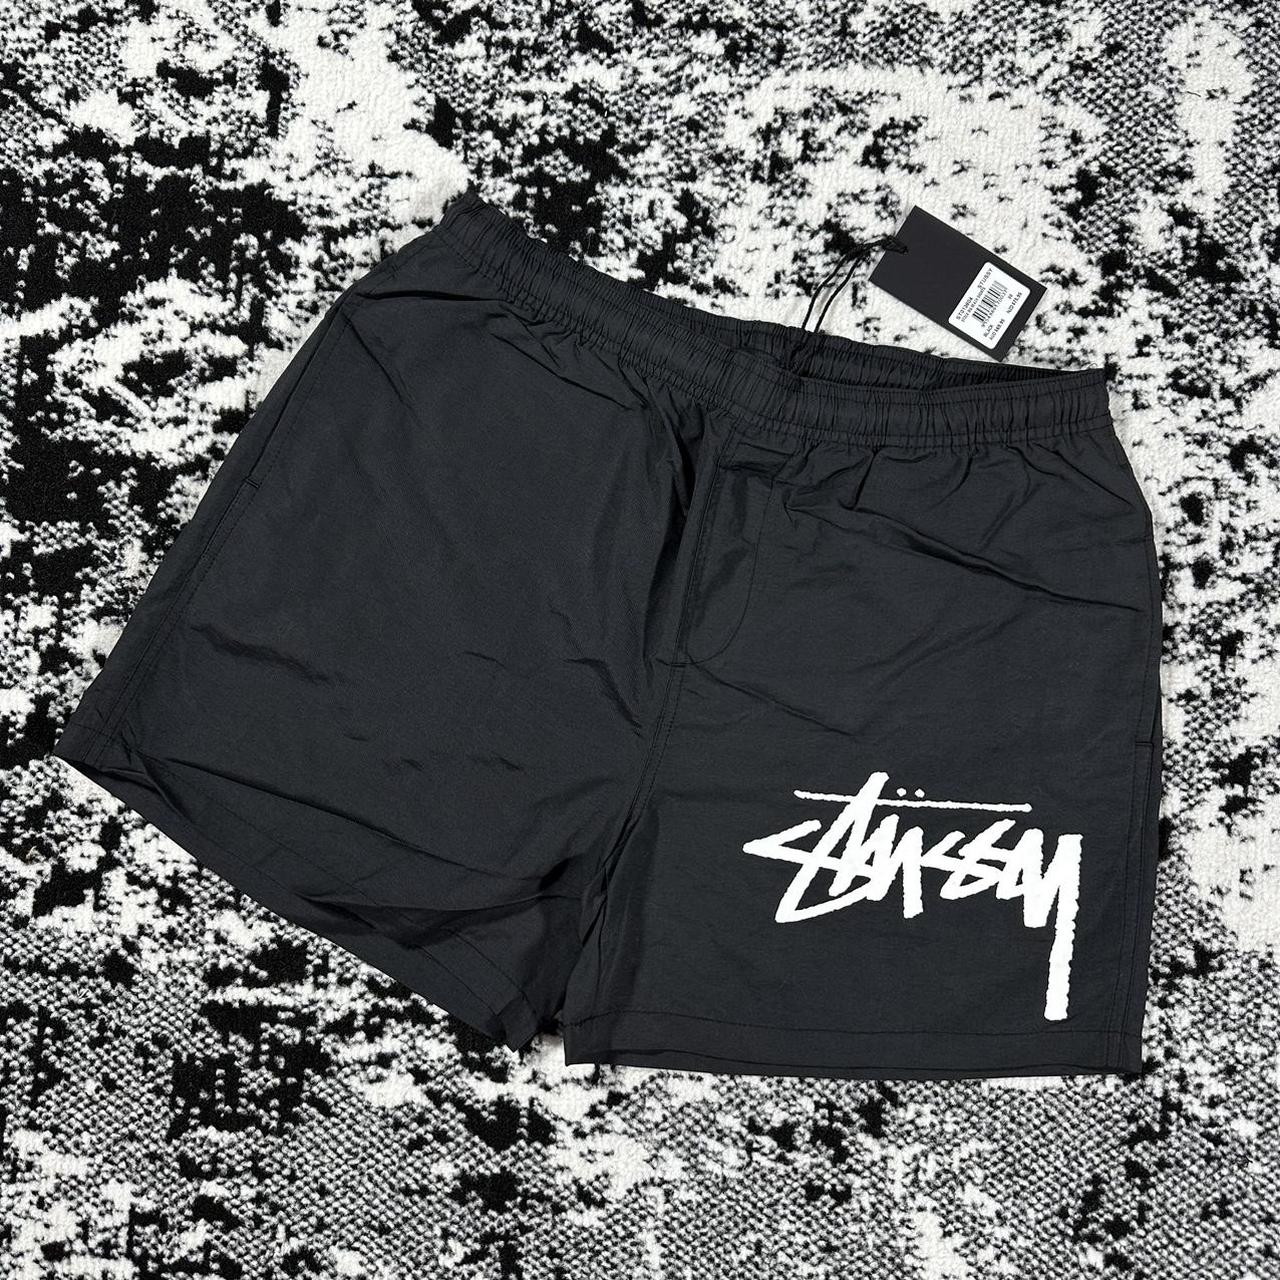 STUSSY STOCK BIG SHORTS -BLACK- In stock for size... - Depop